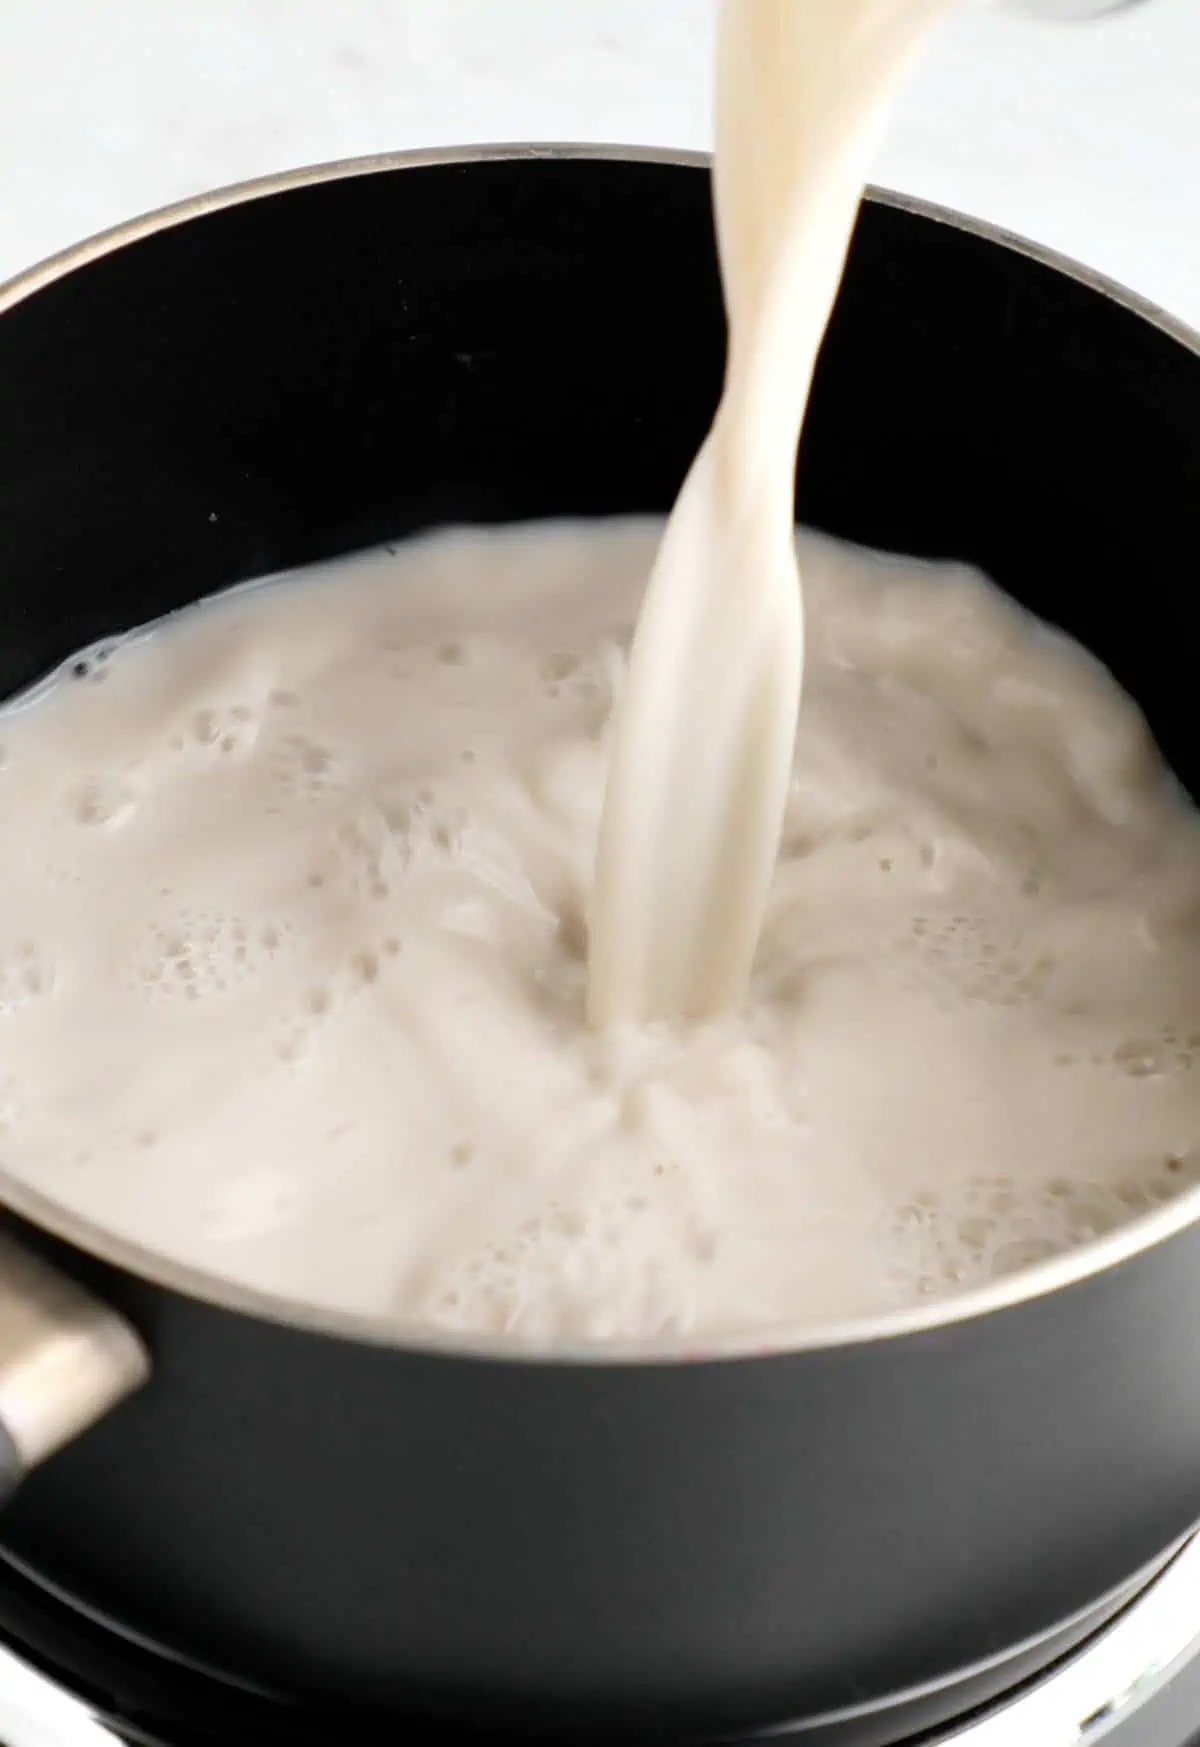 Plant milk being poured in a saucepan.